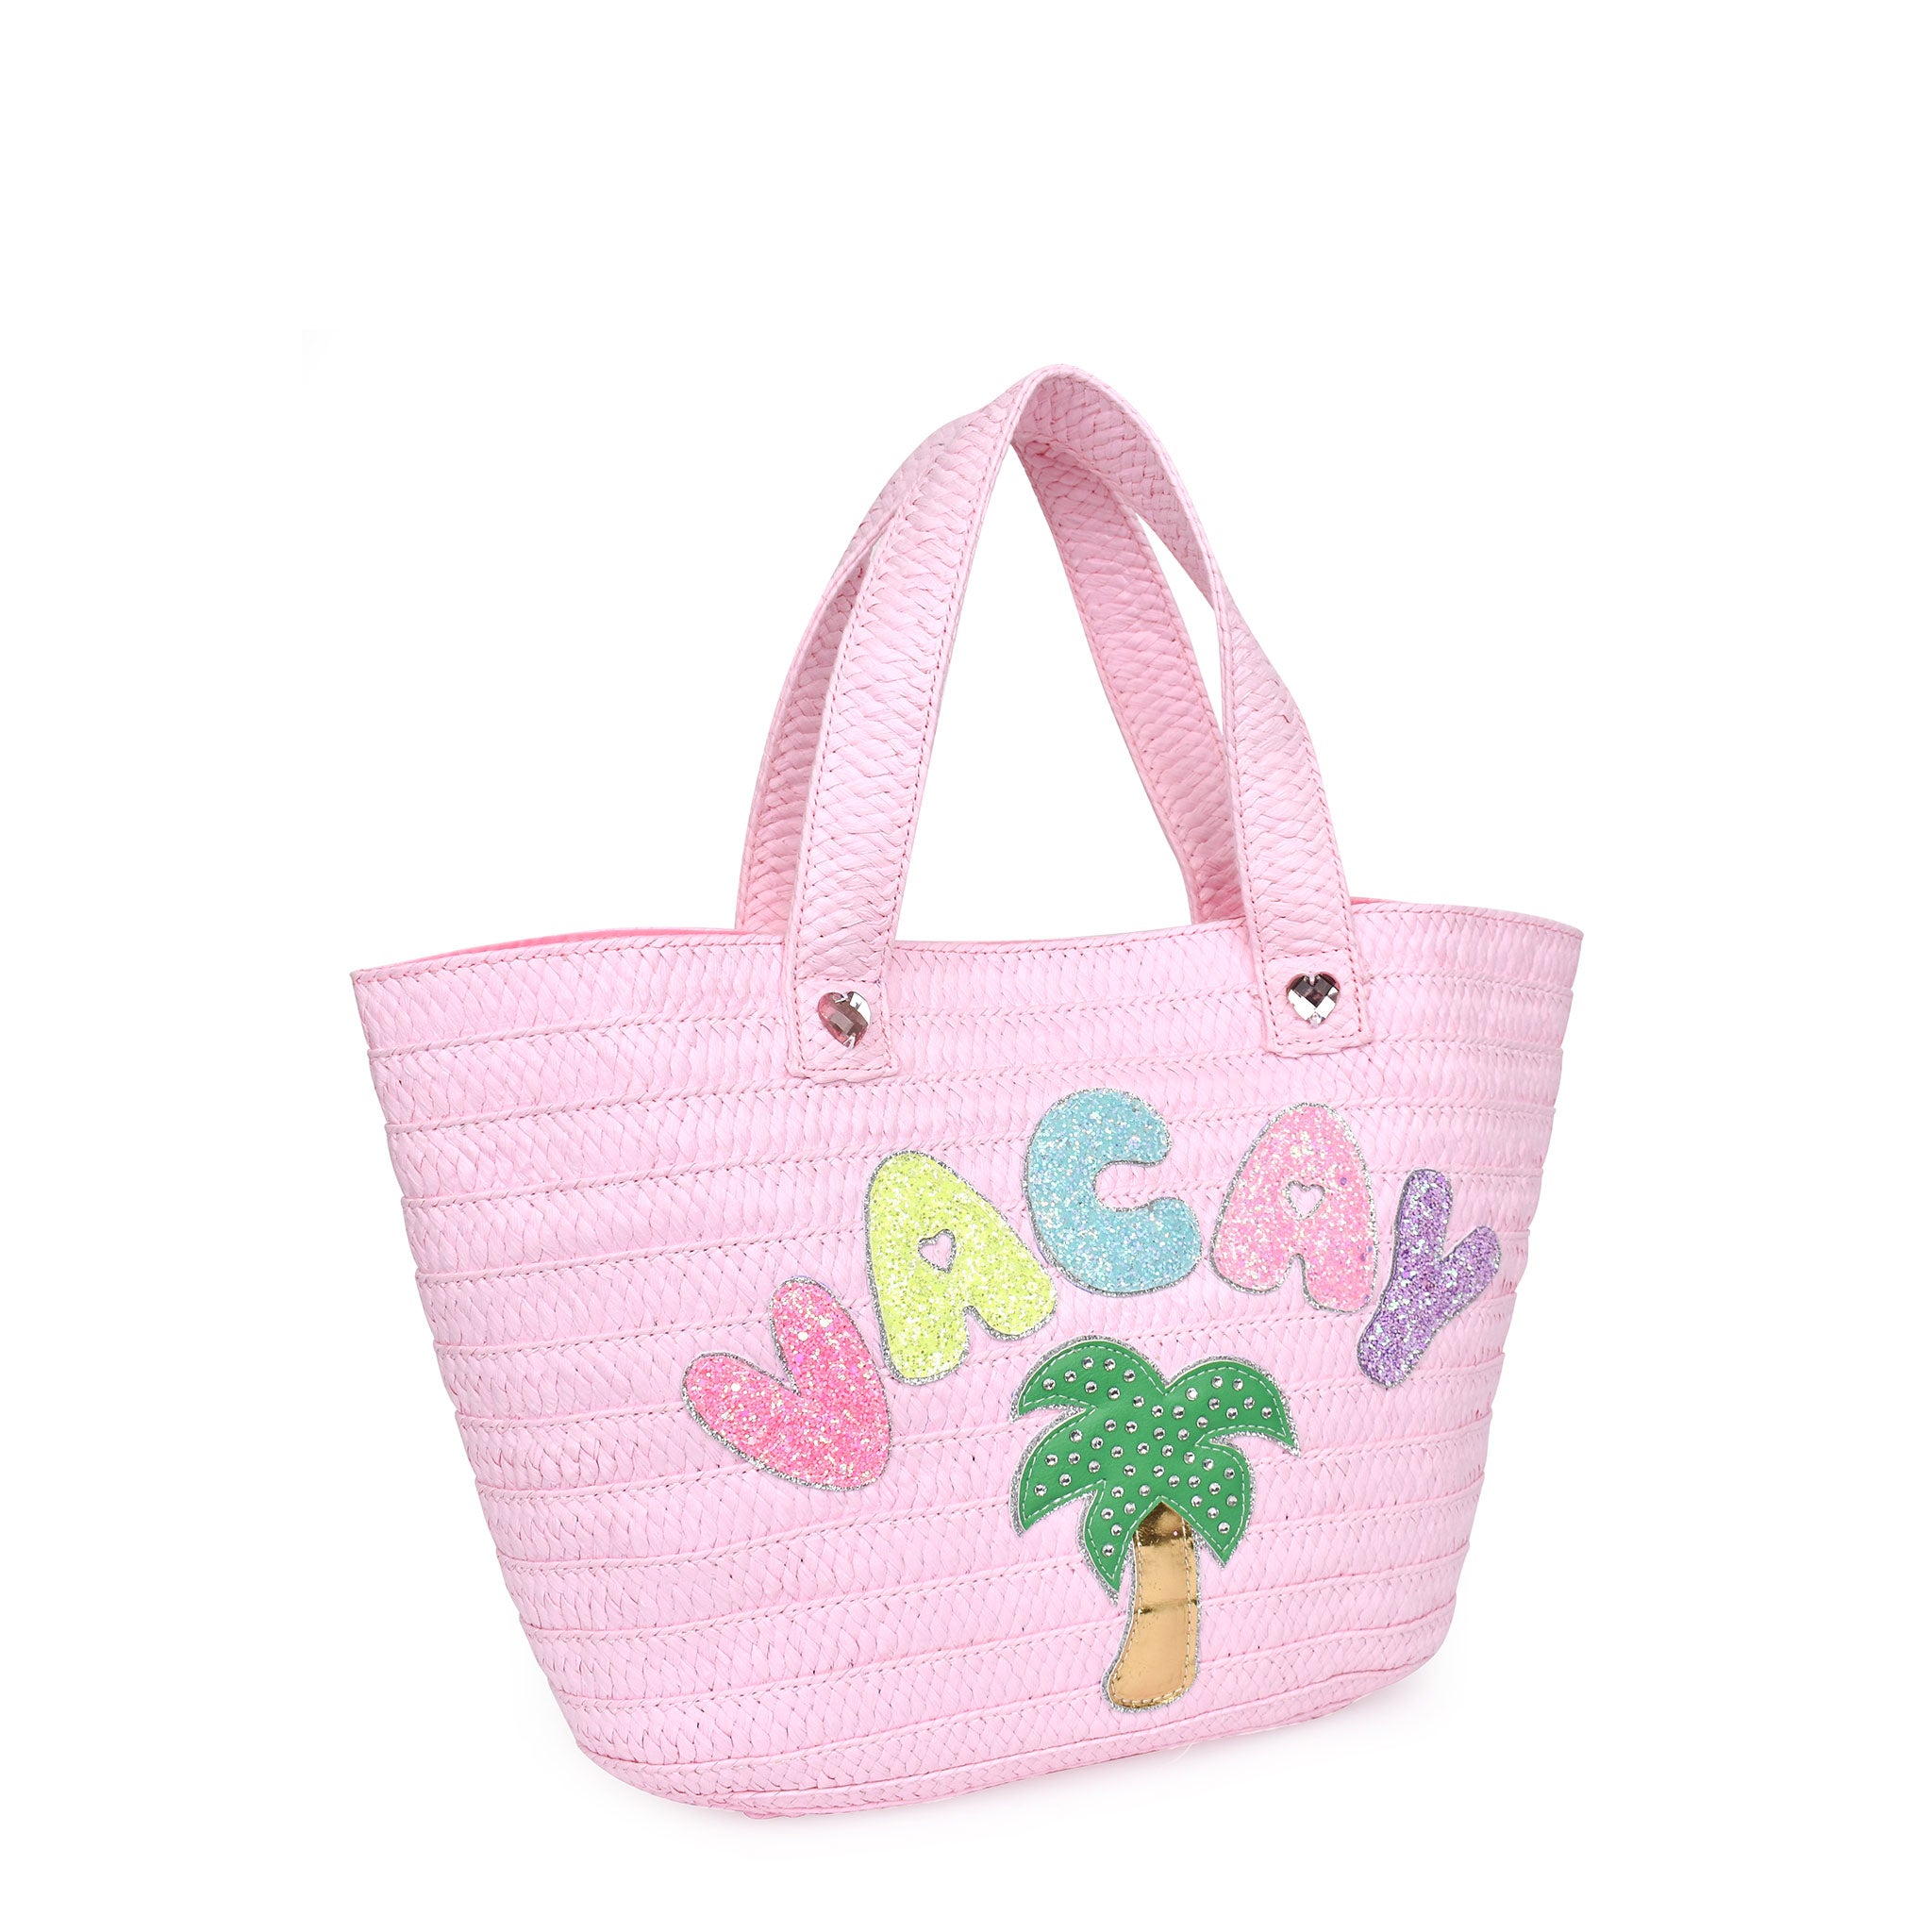 Side view of a pink straw beach tote with glitter bubble letters 'VACAY' and palm tree appliqué